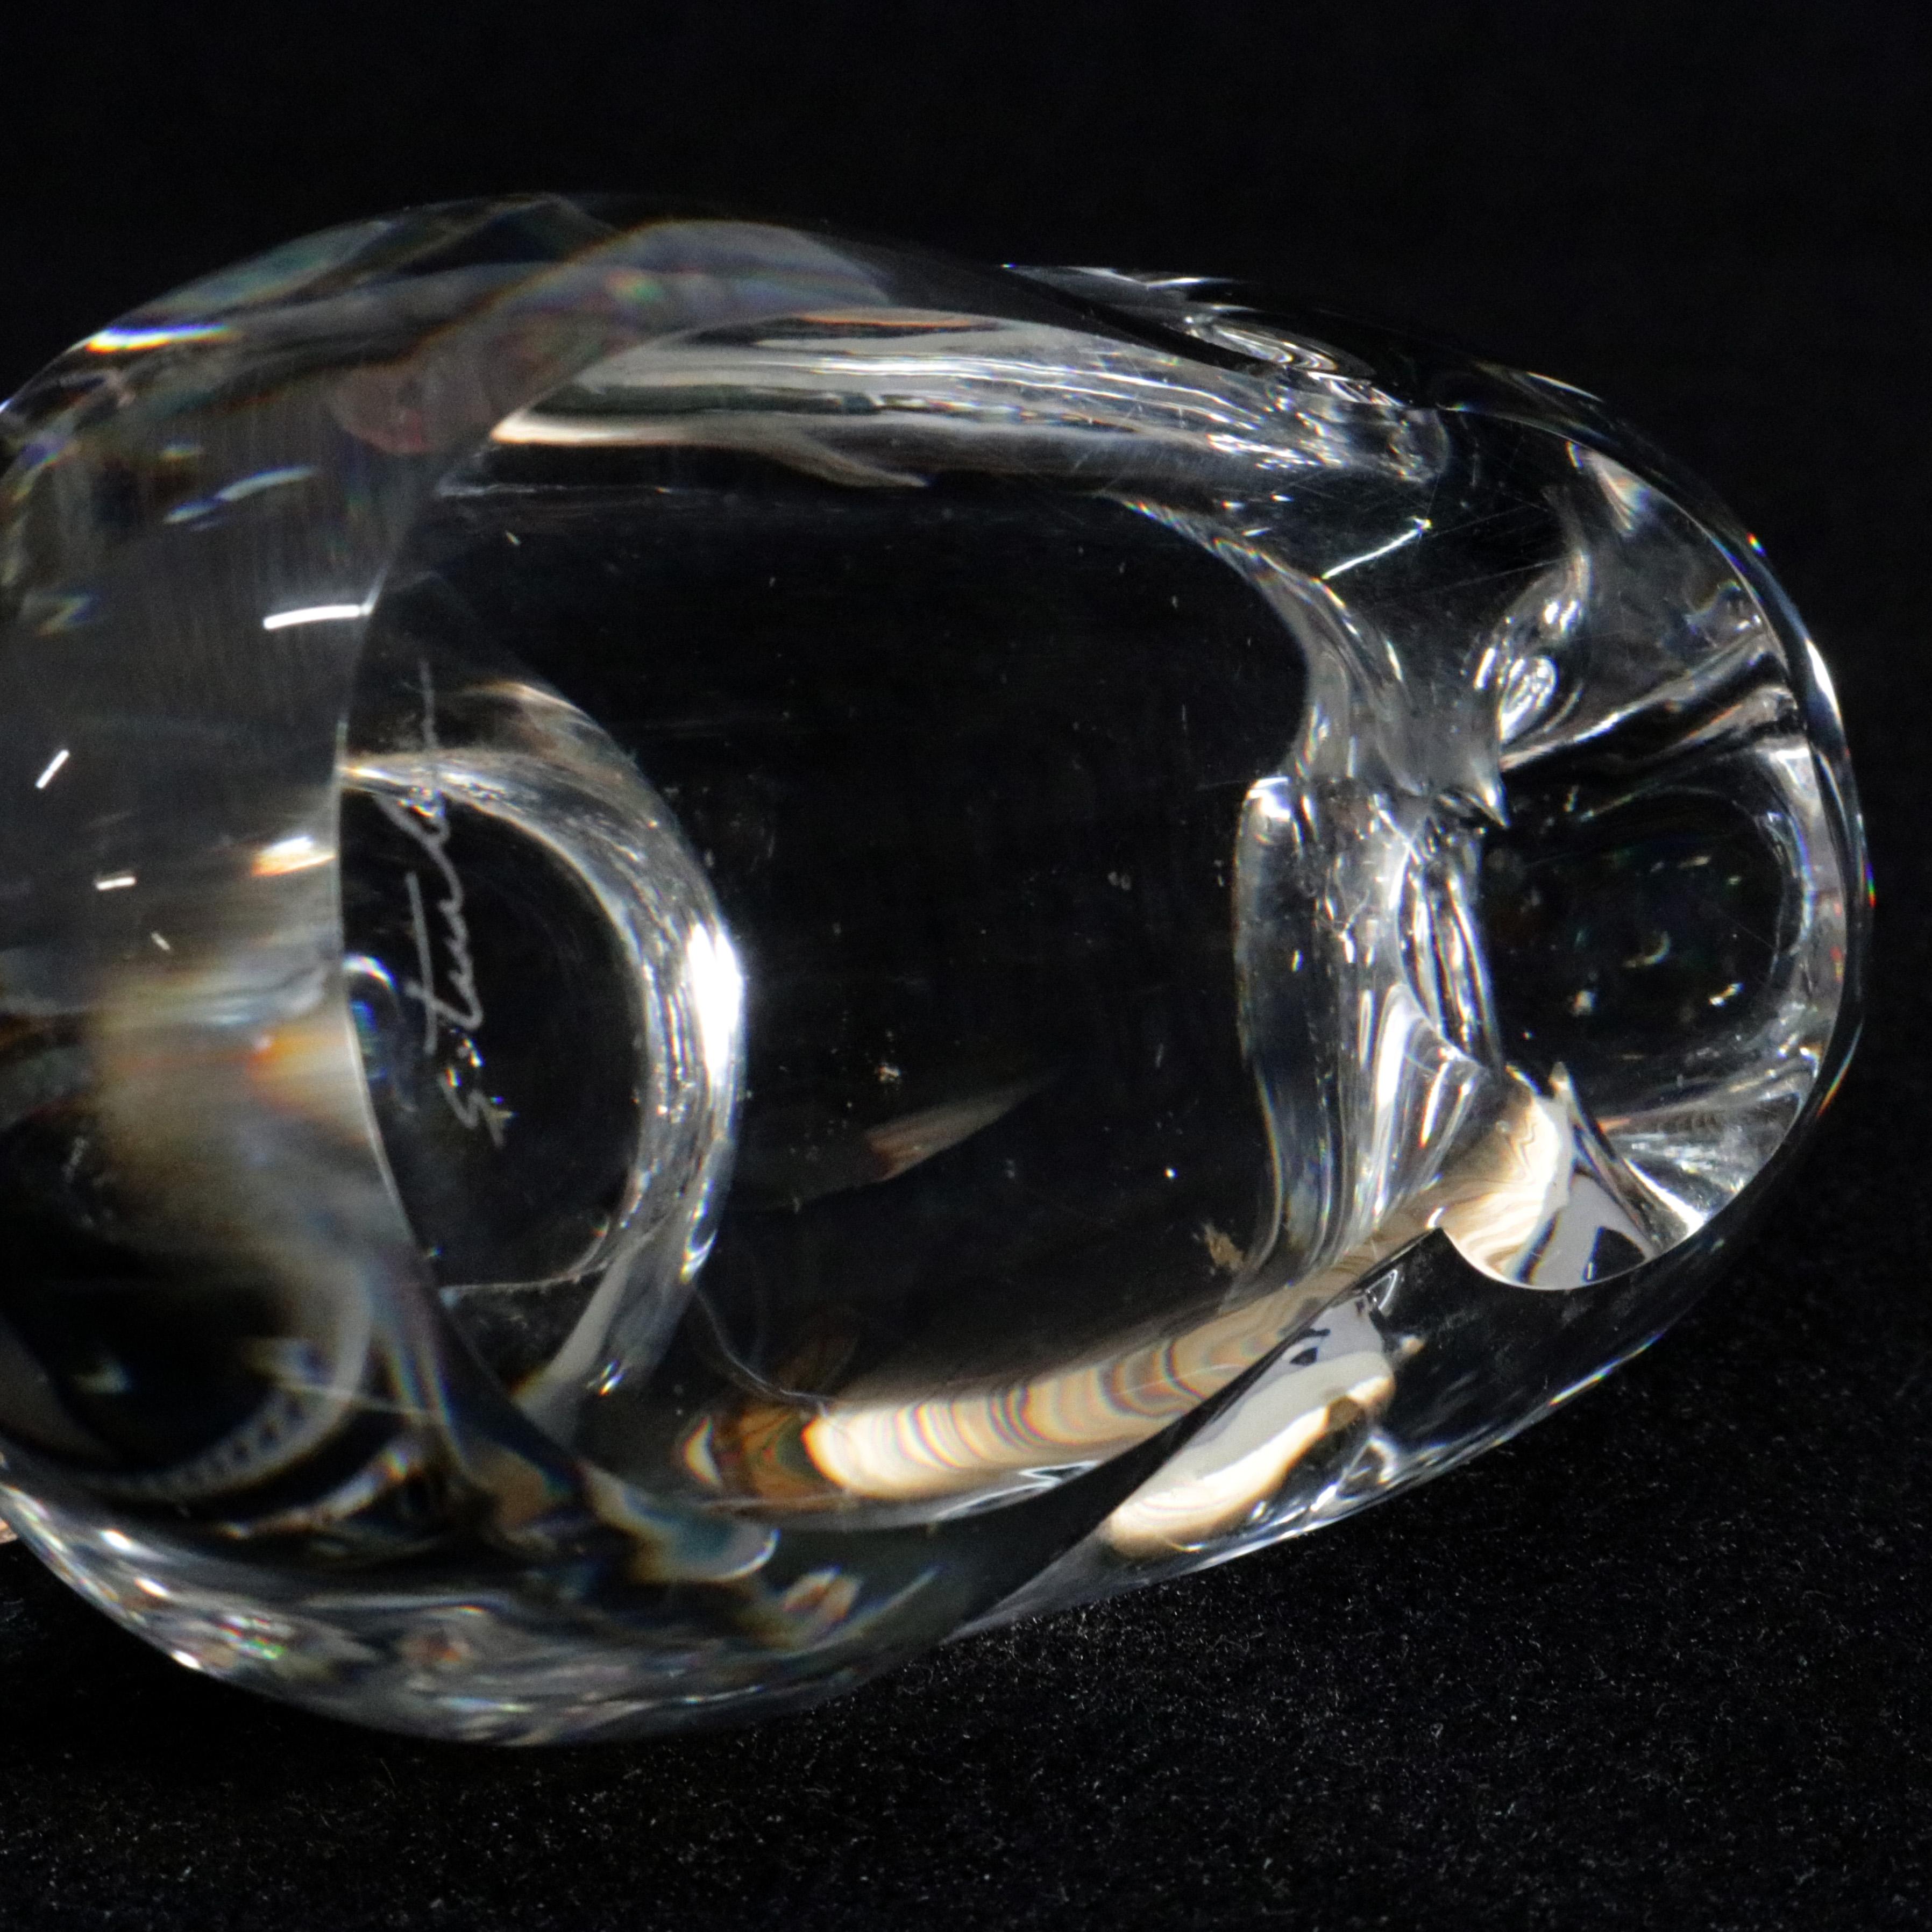 Mid-Century Modern Steuben Crystal Sculpture Paperweight of Baby Duck by Lloyd Atkins 1950, Signed